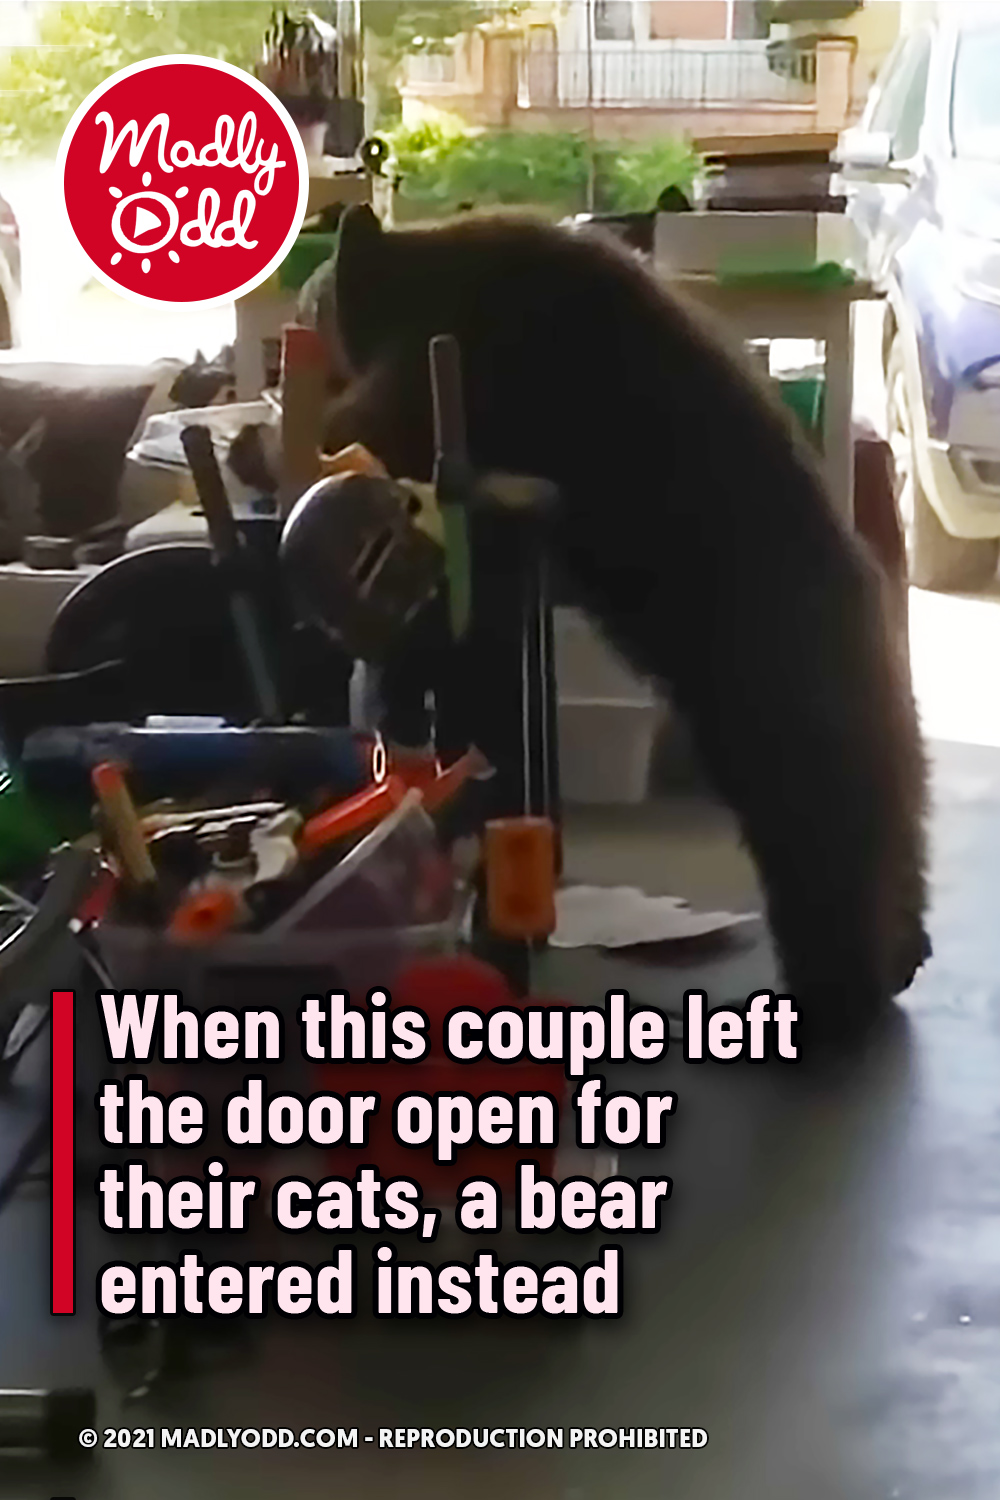 When this couple left the door open for their cats, a bear entered instead